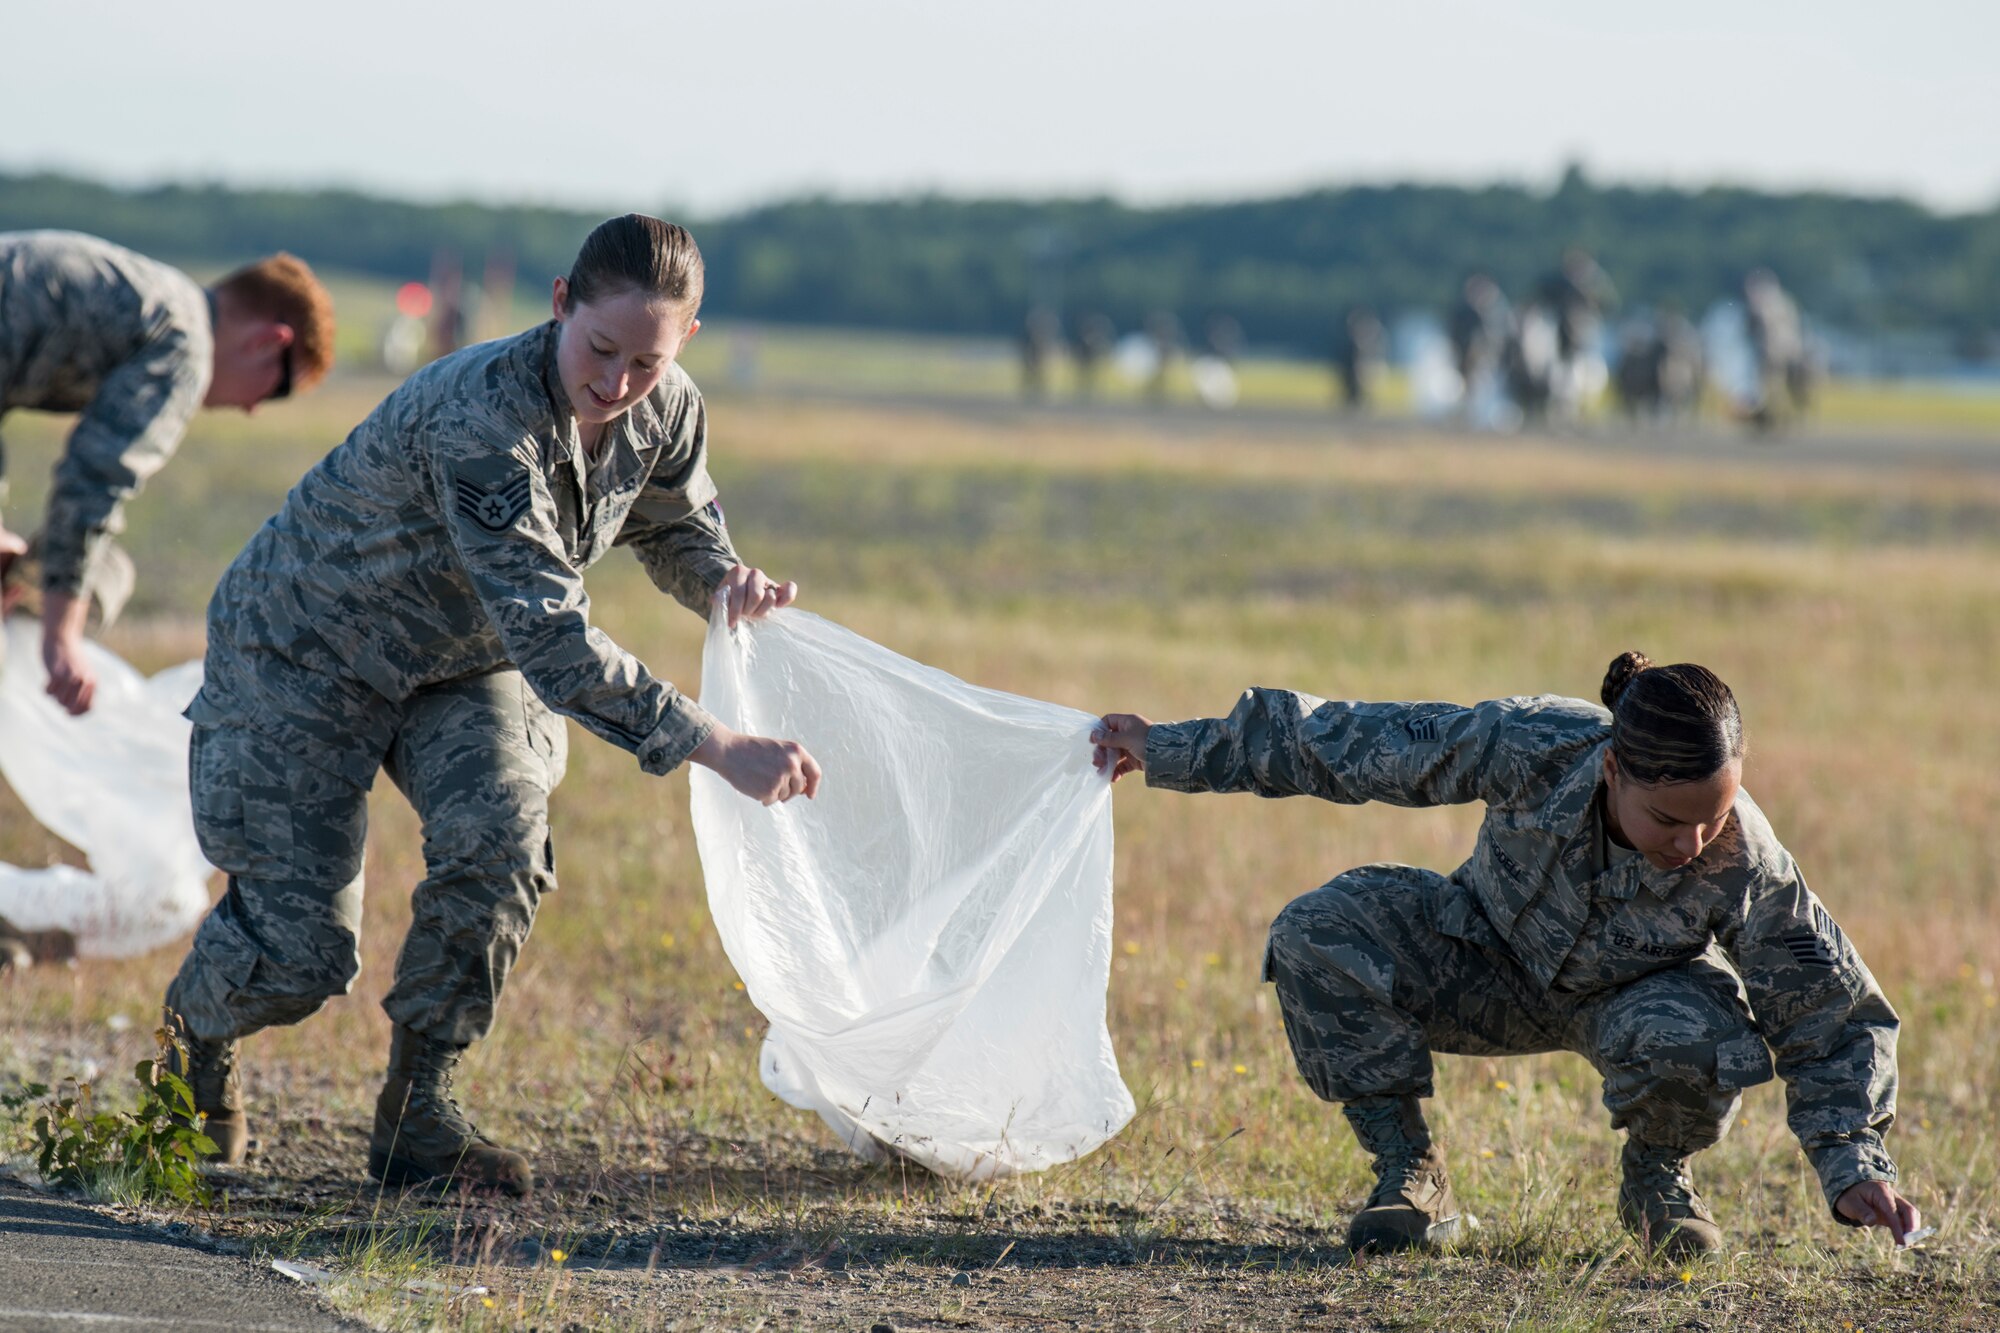 Staff Sgts. Kelsey Padula and Amanda Woodell, both 3rd Munitions Squadron muntions systems crew chiefs, pick up trash during a foreign object and debris walk at Joint Base Elmendorf-Richardson, Alaska, July 2, 2018. The JBER Airmen conducted the FOD walk after the Arctic Thunder Open House to remove debris that could damage aircraft and hinder mission readiness.